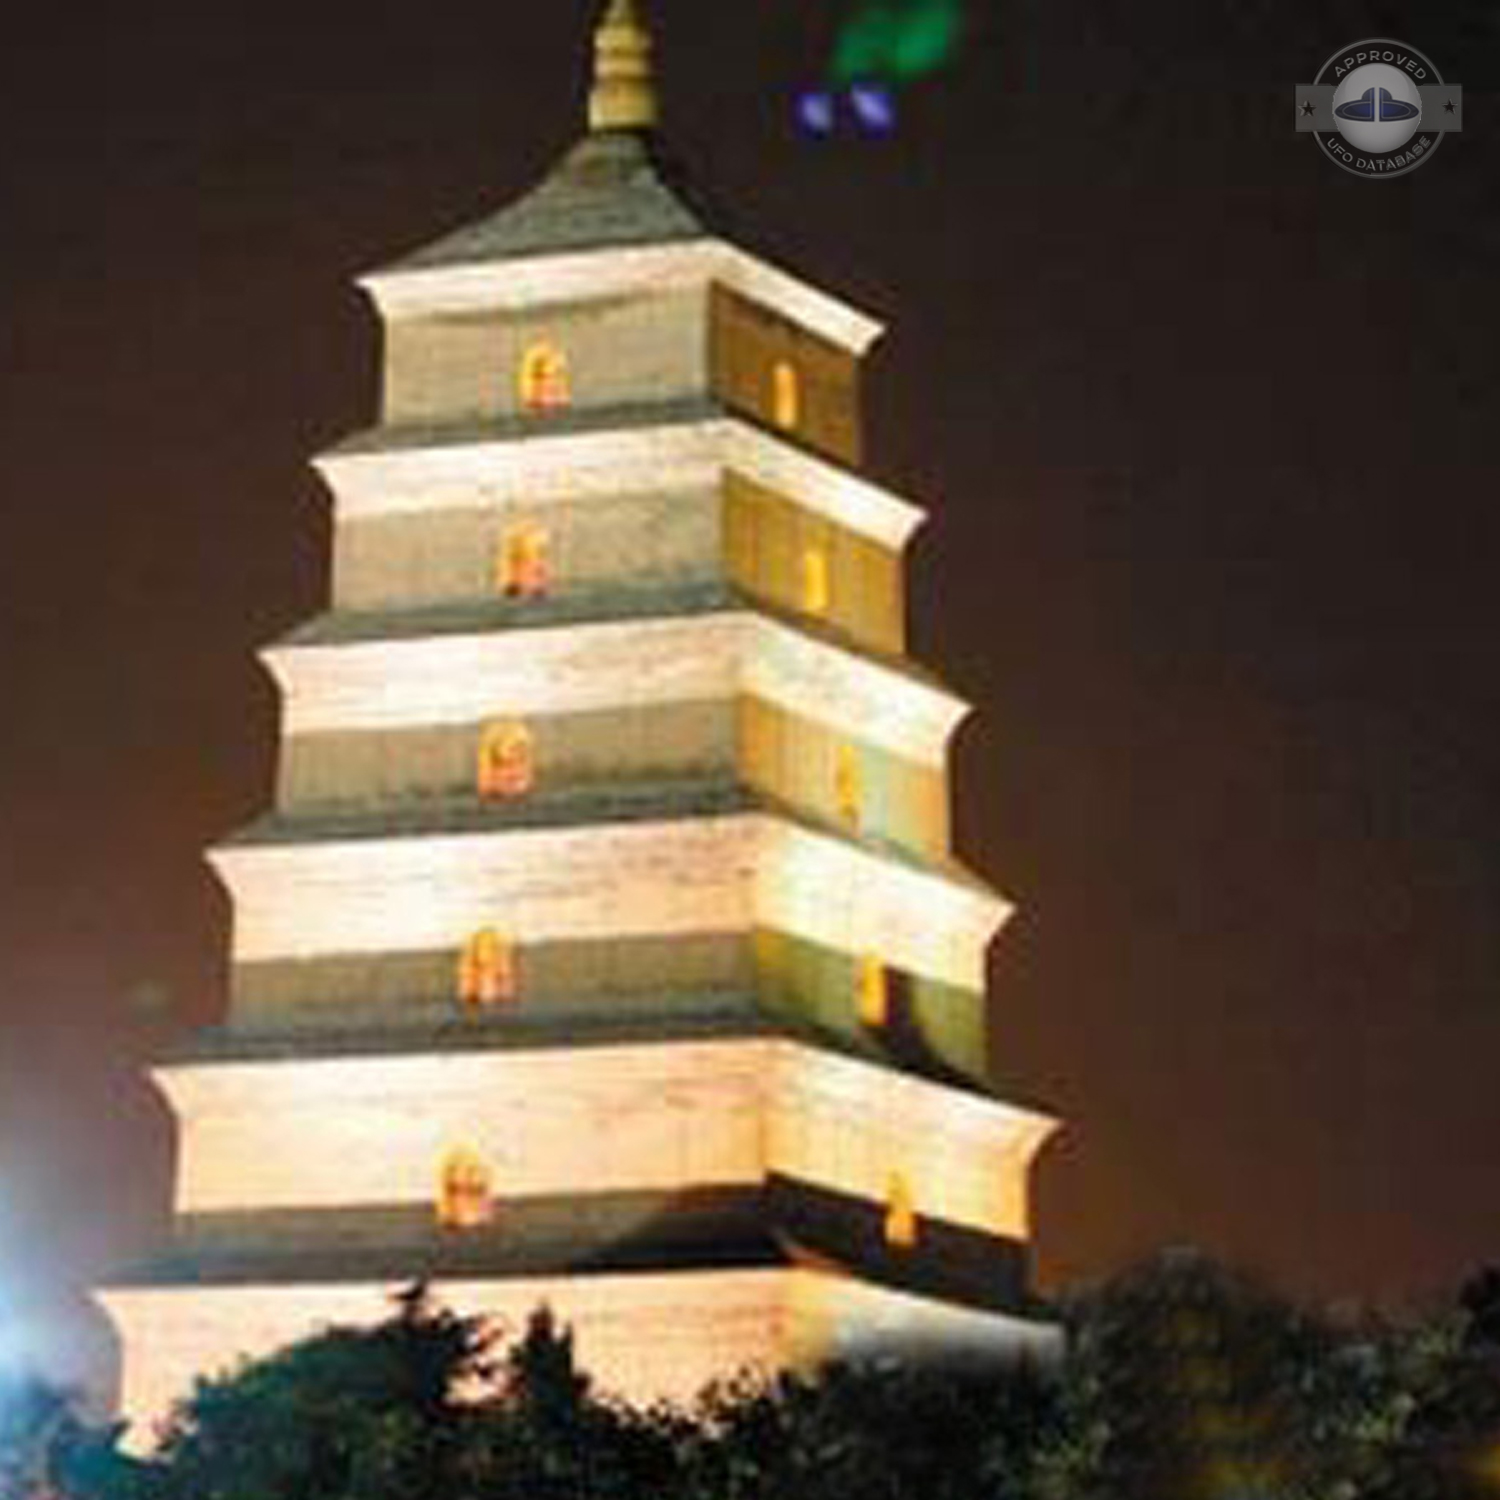 Purple glowing UFO over Giant Wild Goose Pagoda temple | China | 2009 UFO Picture #219-2